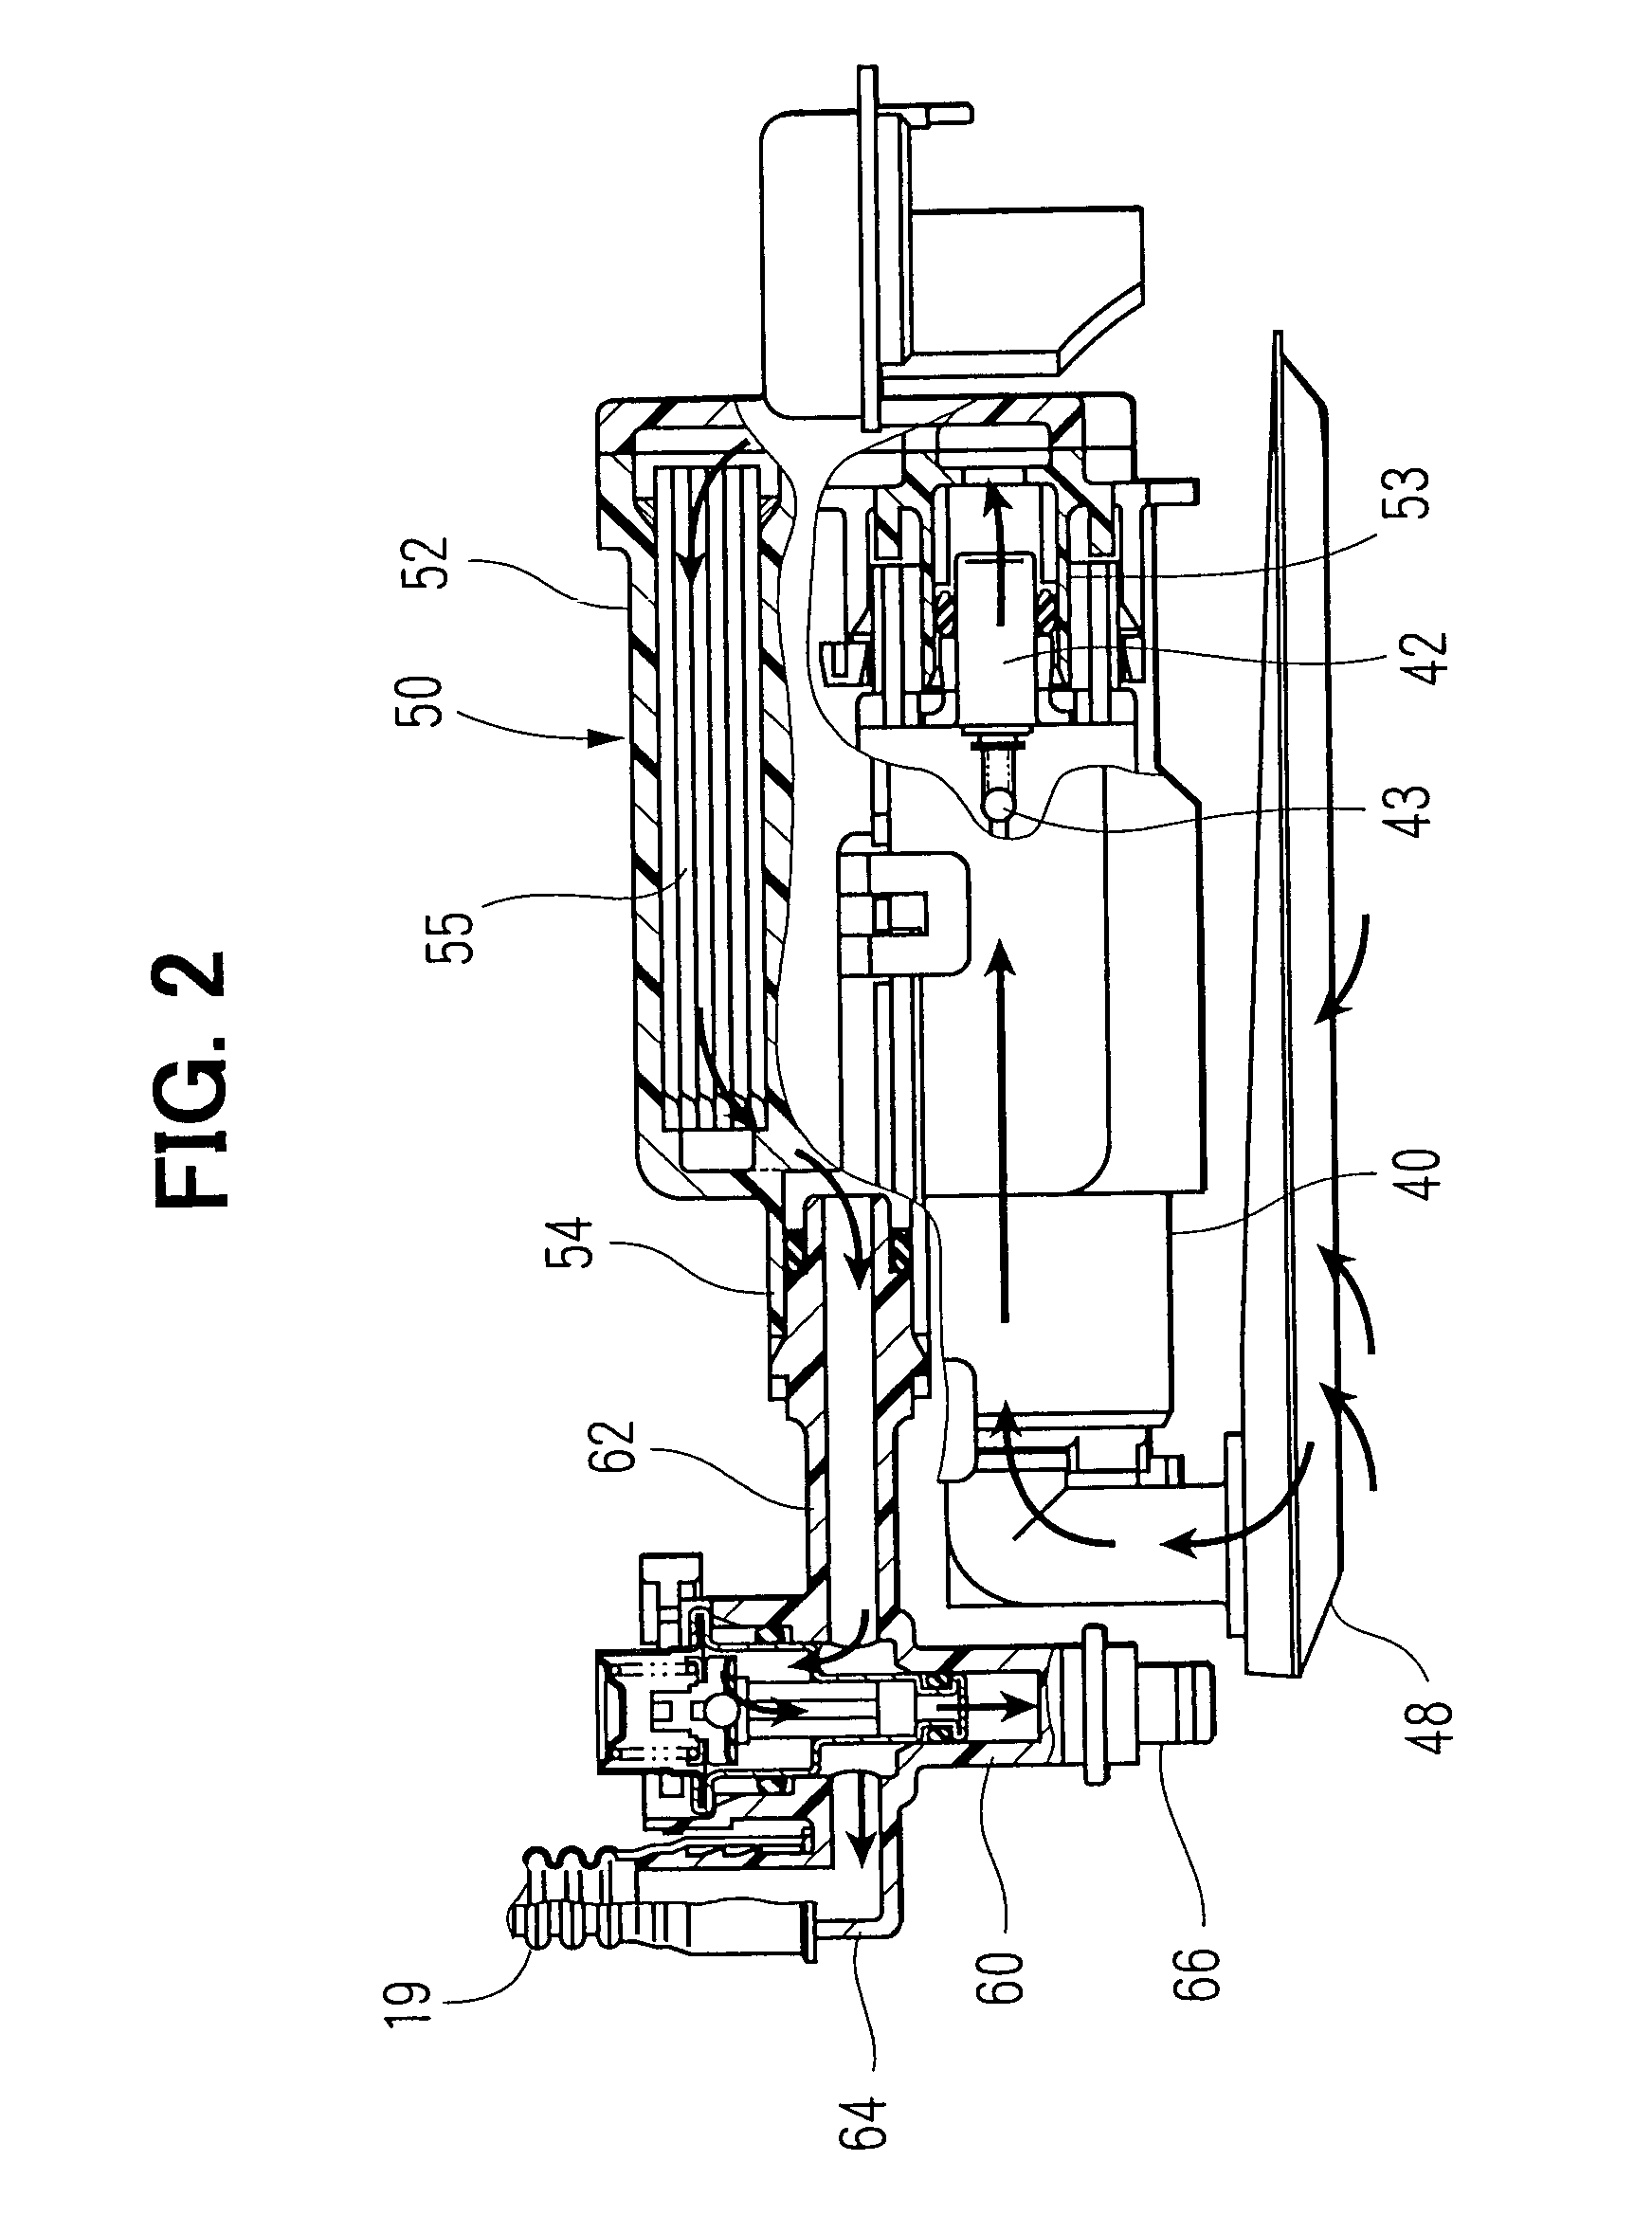 Fuel feed apparatus having conductive members grounded each other